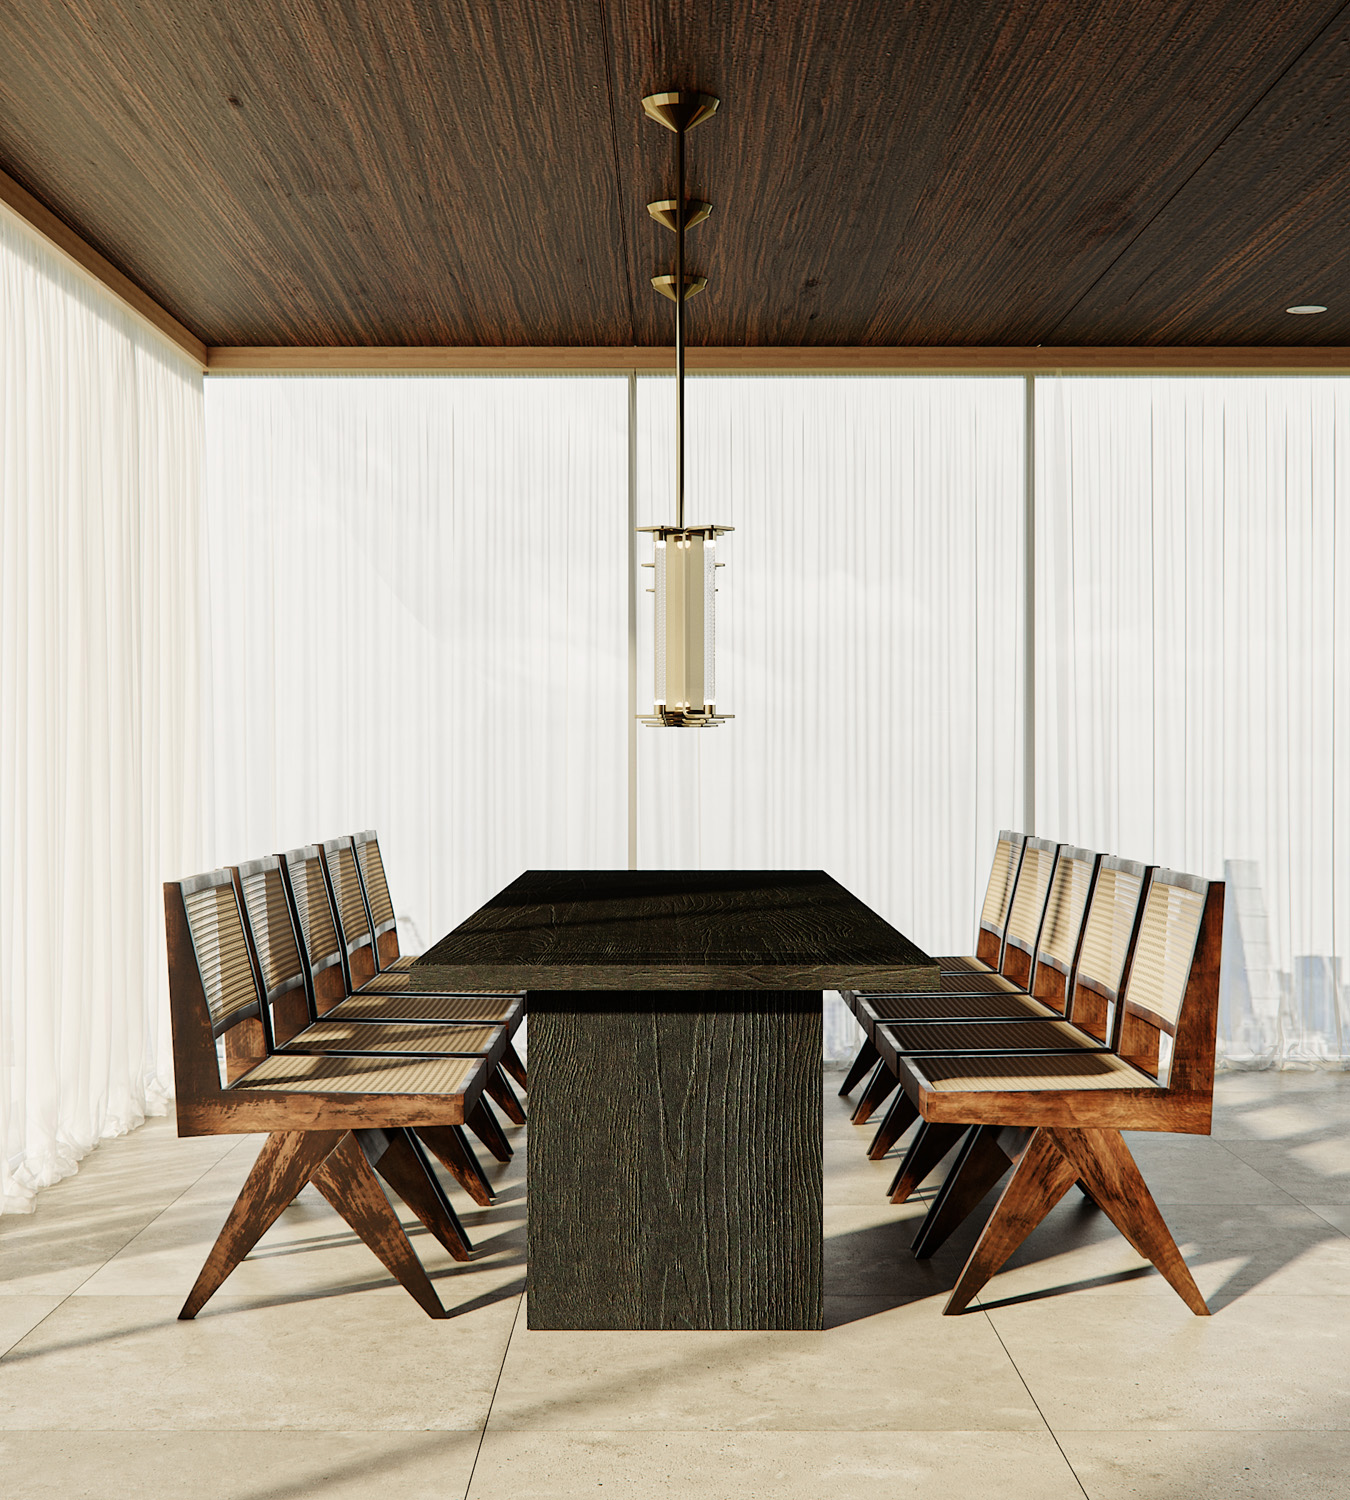 Dining table by Miminat Design